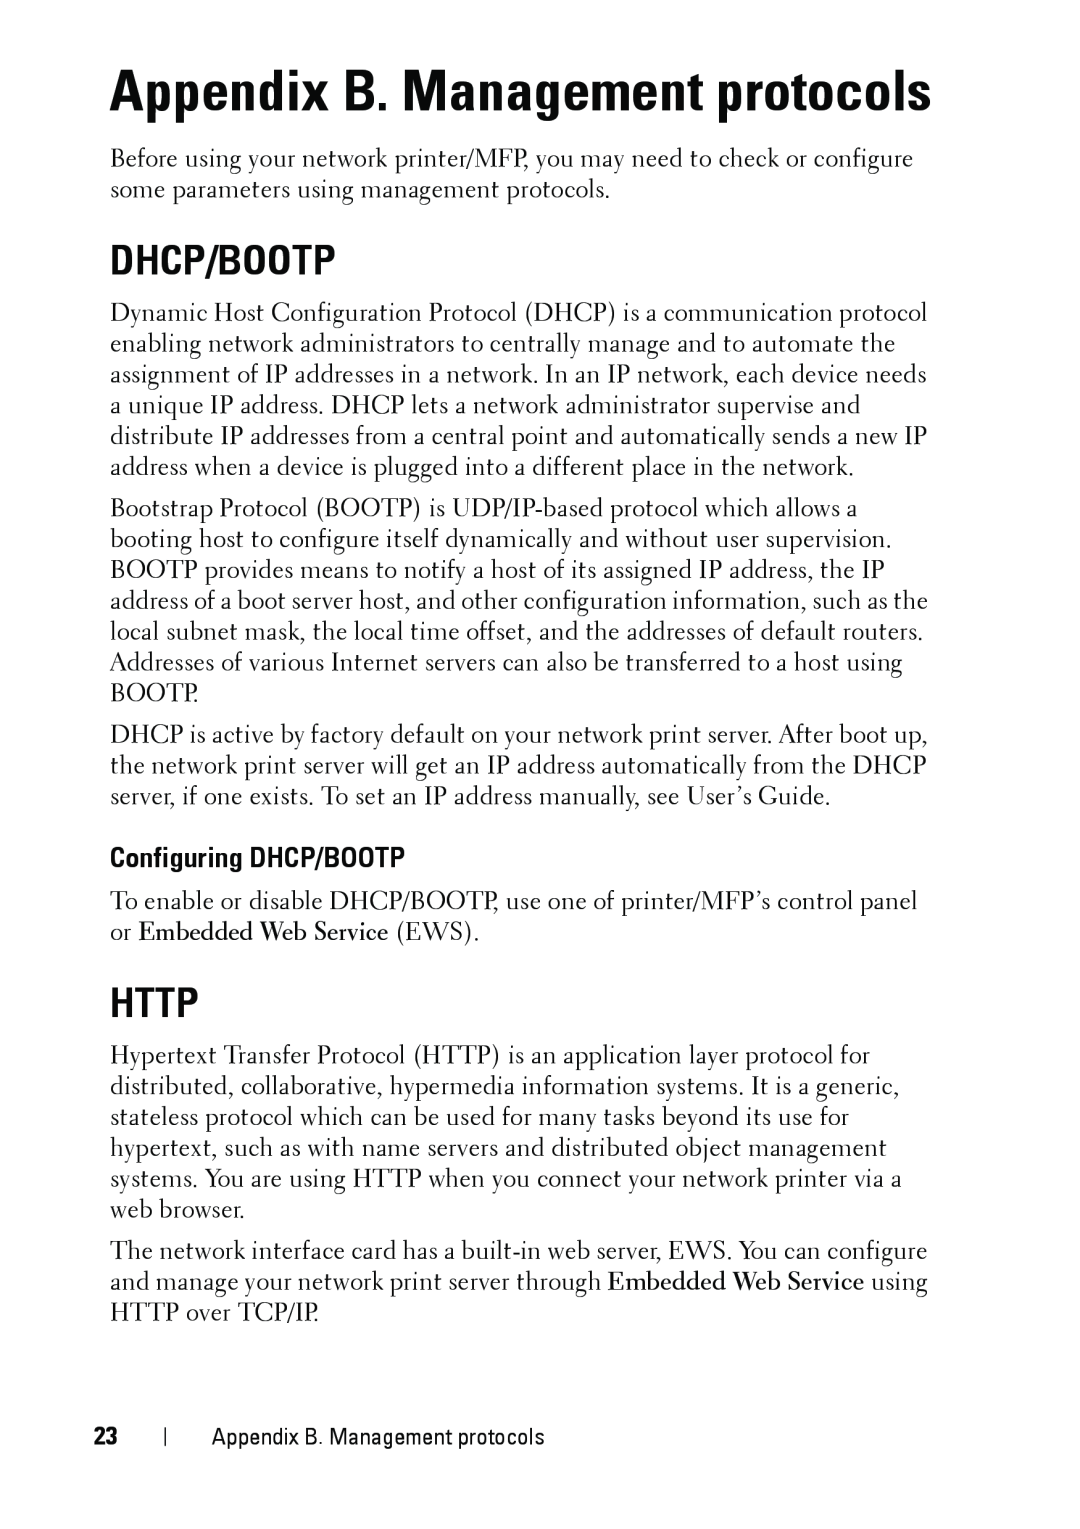 Dell 5002 manual Appendix B. Management protocols, Dhcp/Bootp, Http, Configuring DHCP/BOOTP 